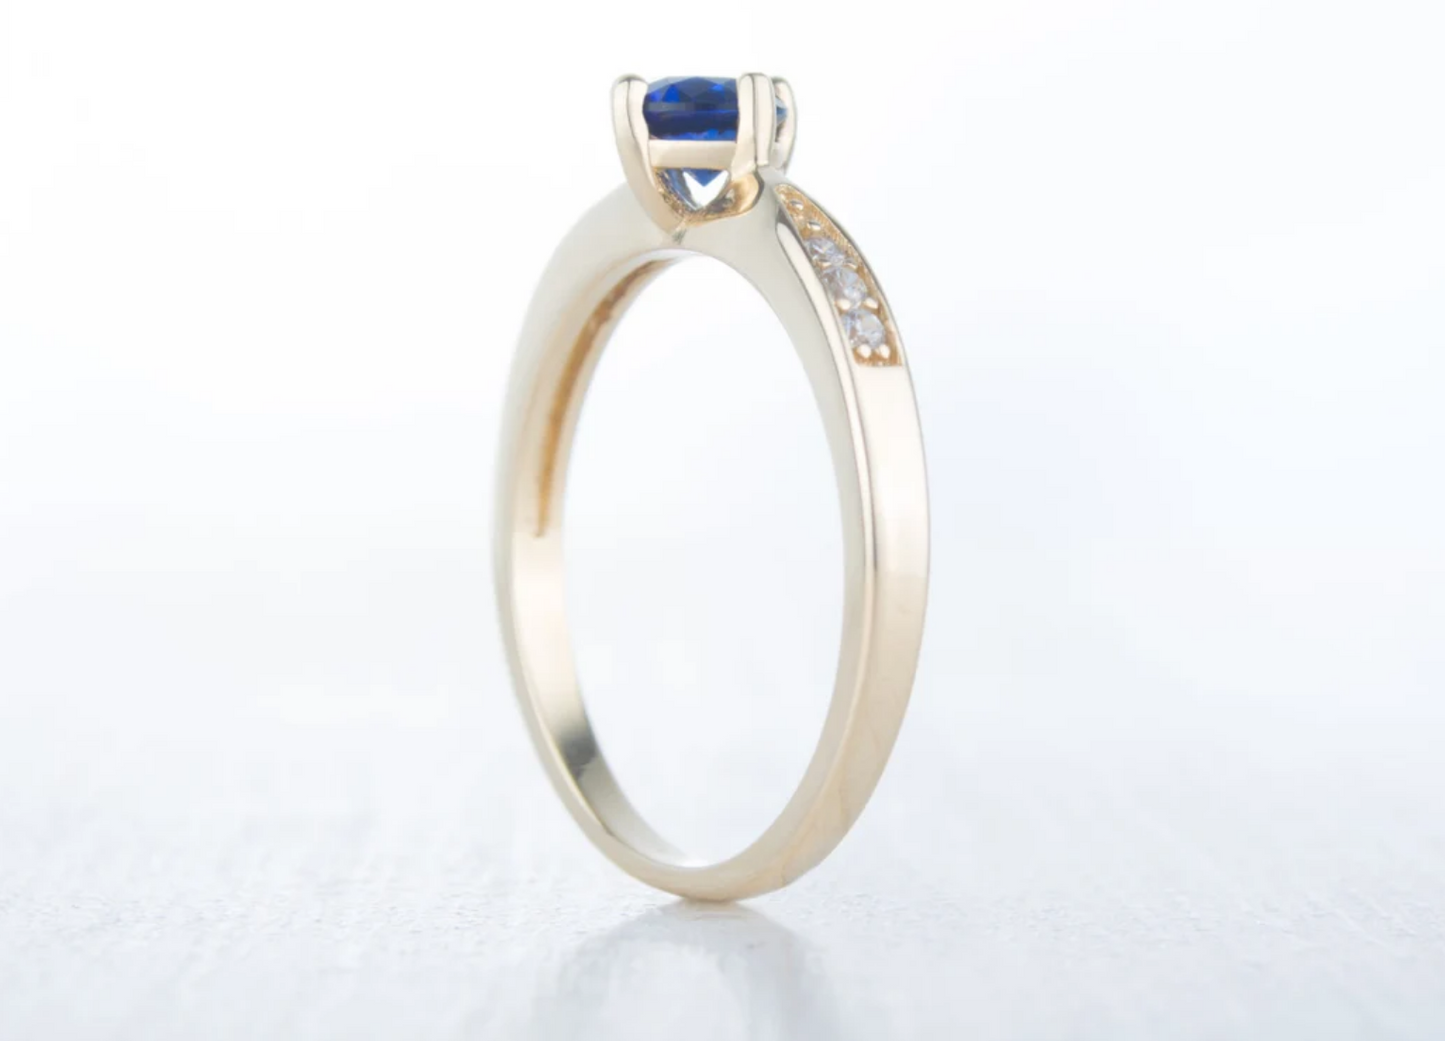 Size UK O / US 7 10K Solid Yellow Gold and Natural blue sapphire Engagement ring.